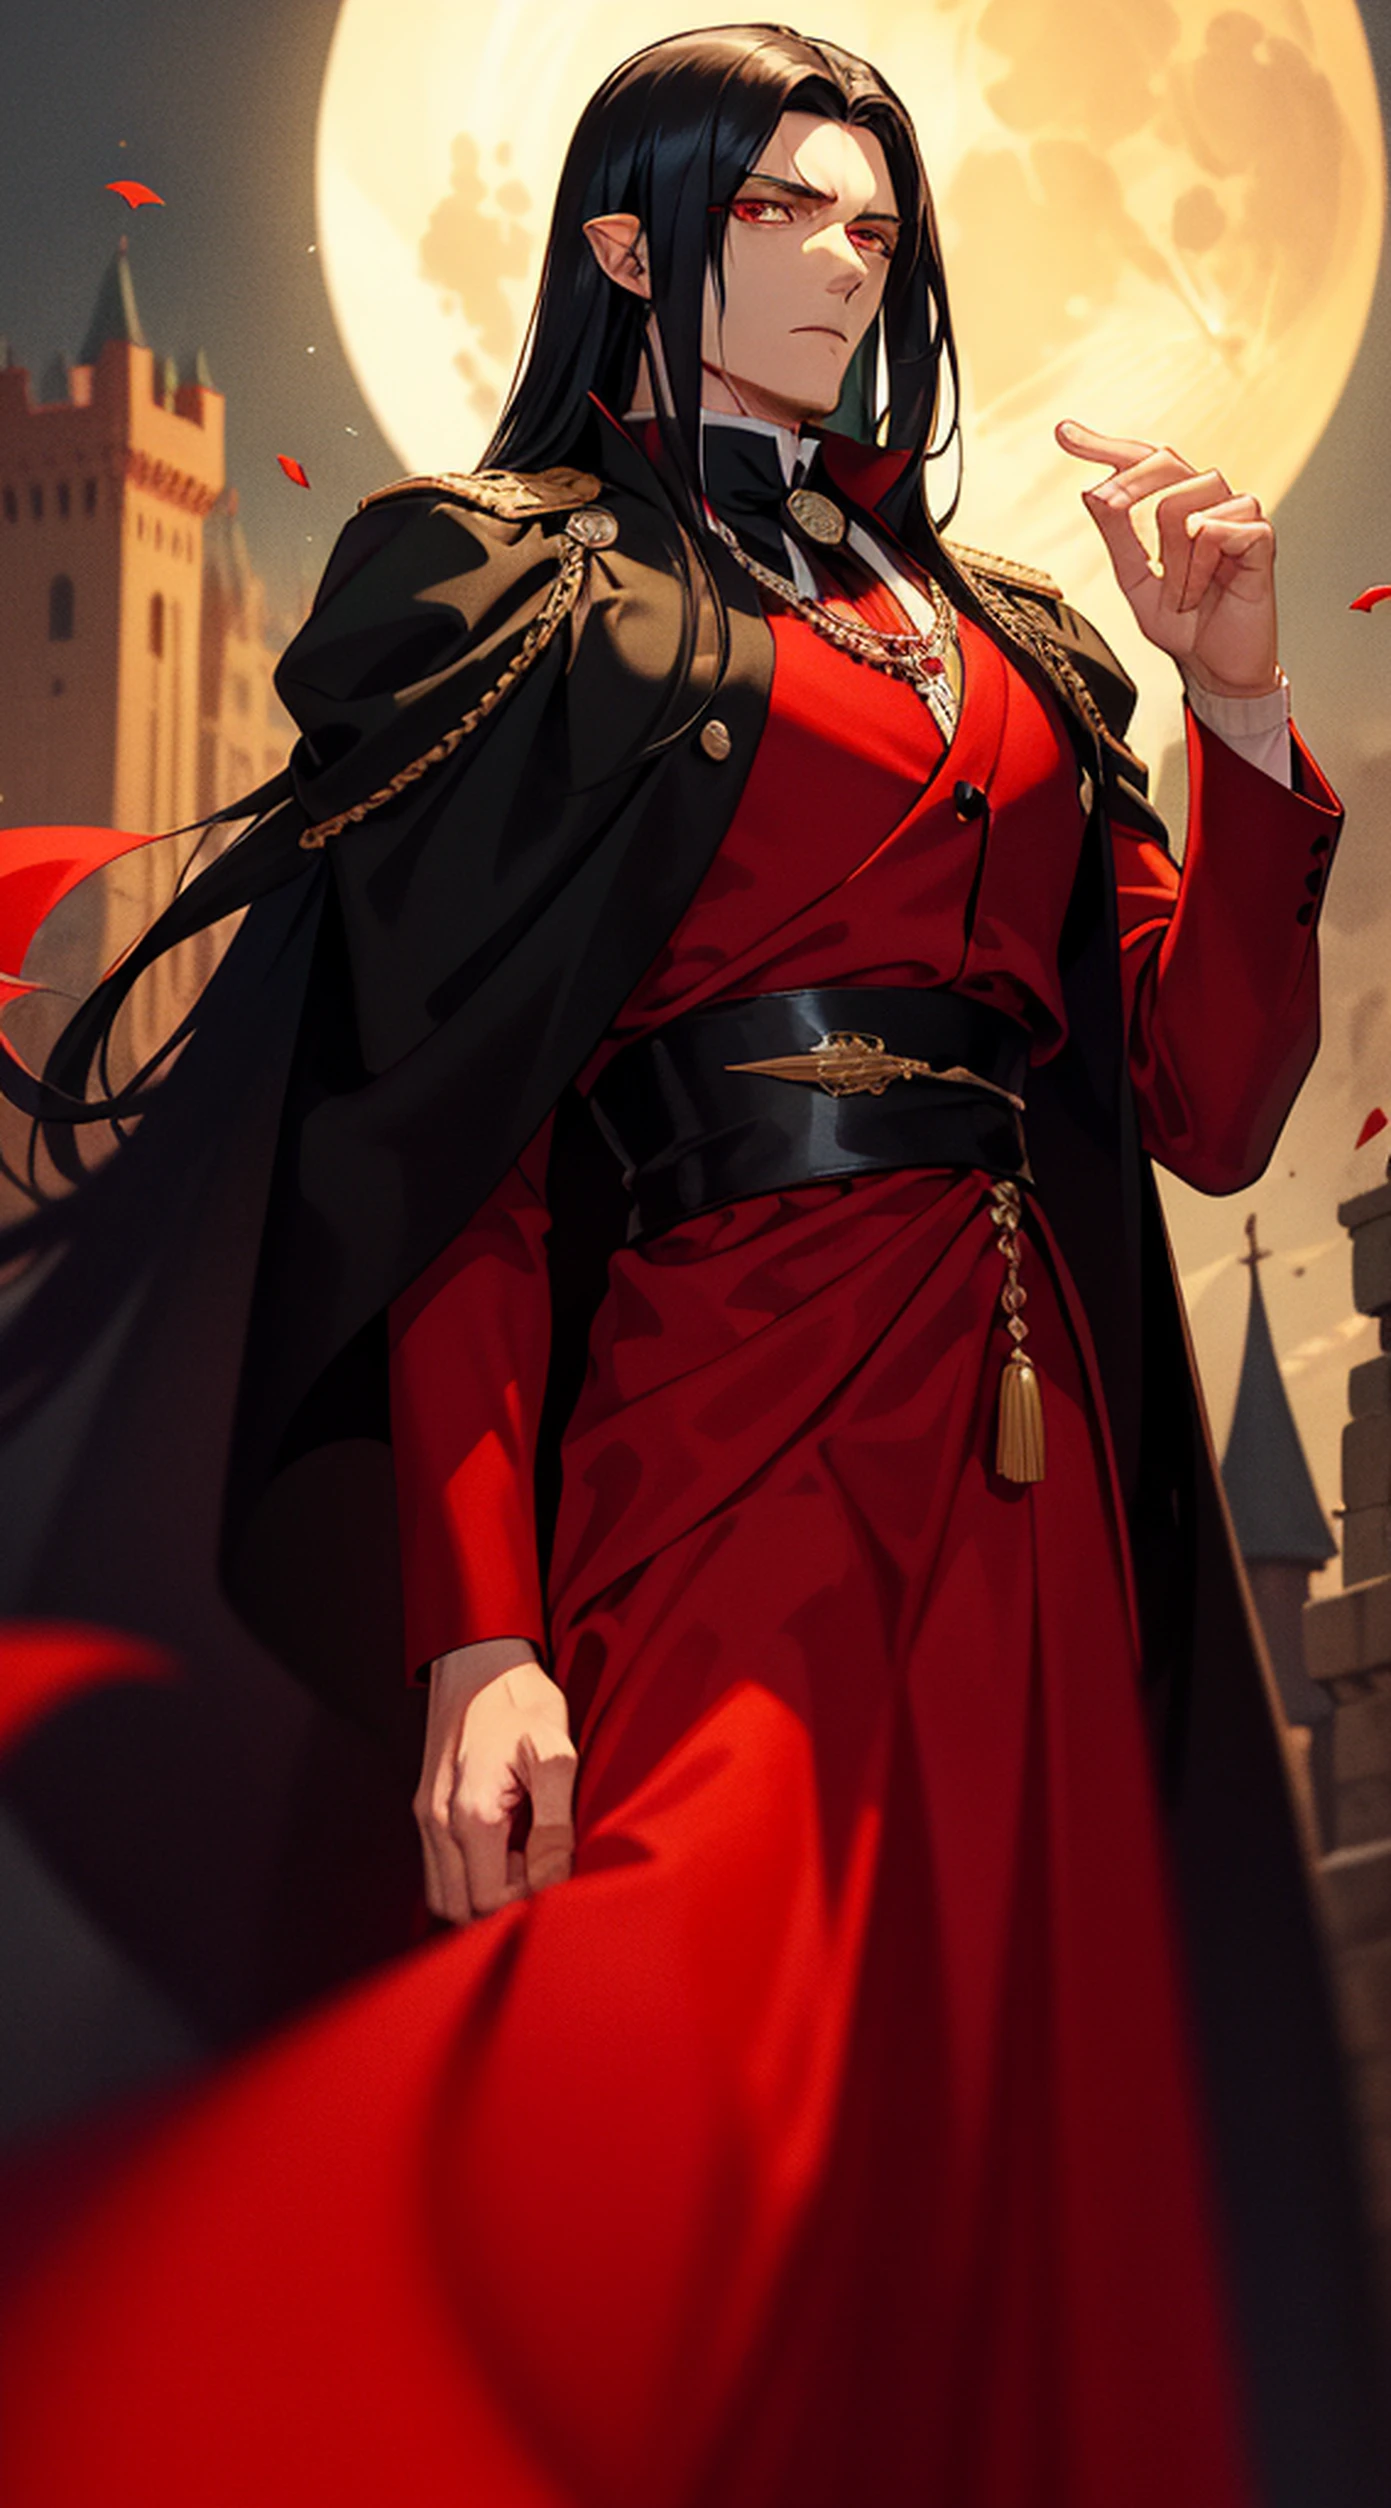 A handsome man, a vampire king with long black hair and red eyes, he wears a brown robe and black outfit with red. (Senarius a bloody moon night in a royal castle)